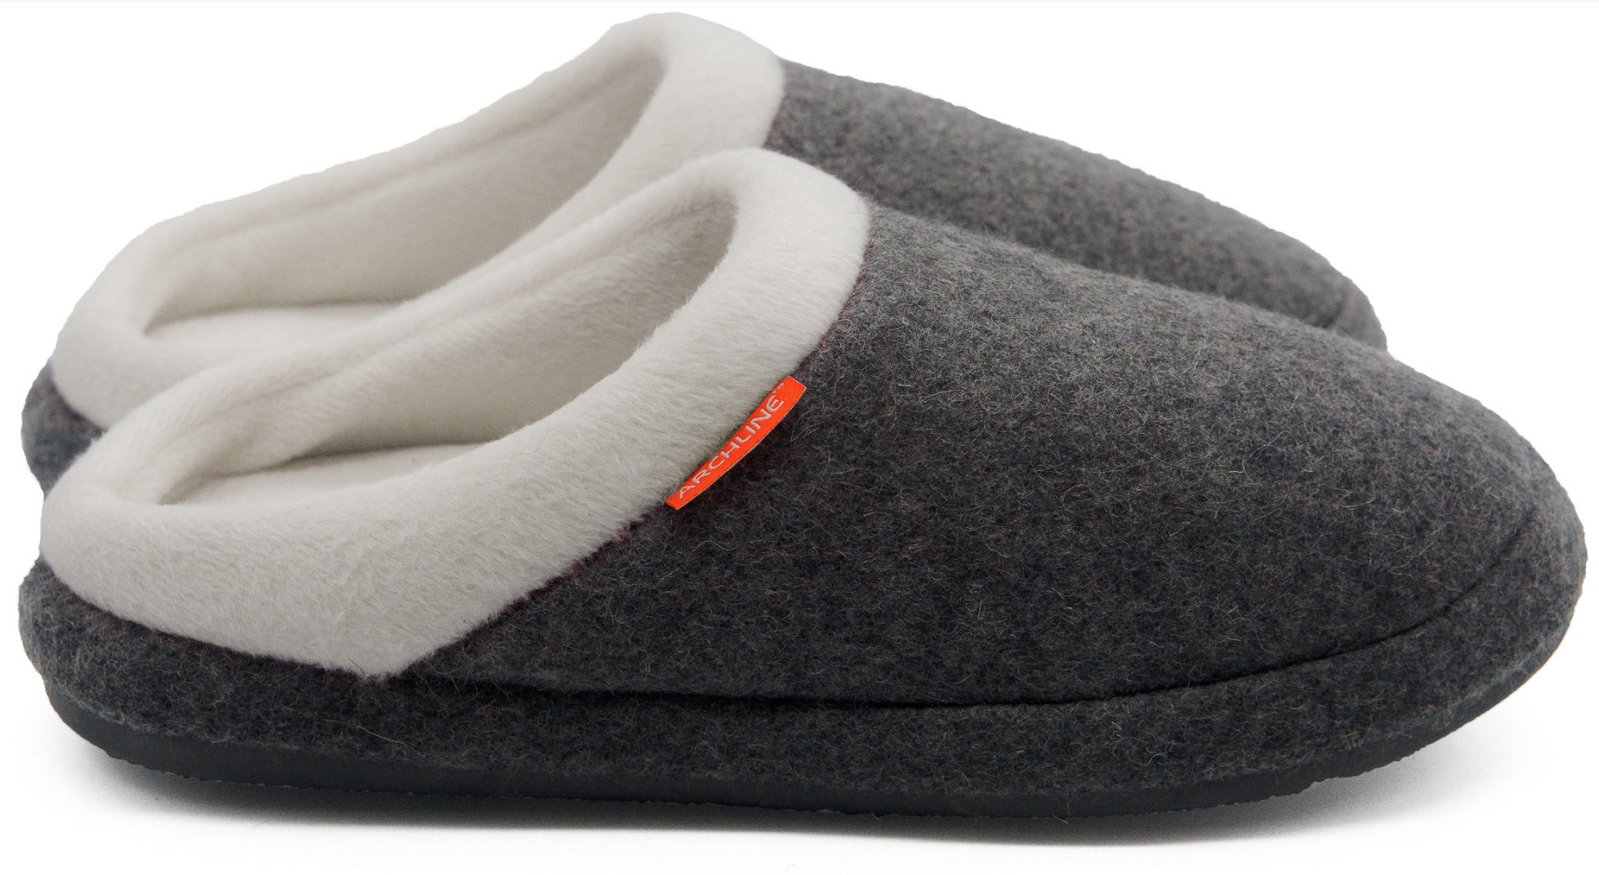 Orthotic Slippers Slip On Arch Scuffs Orthopedic Moccasins - Grey Marle - EUR 44